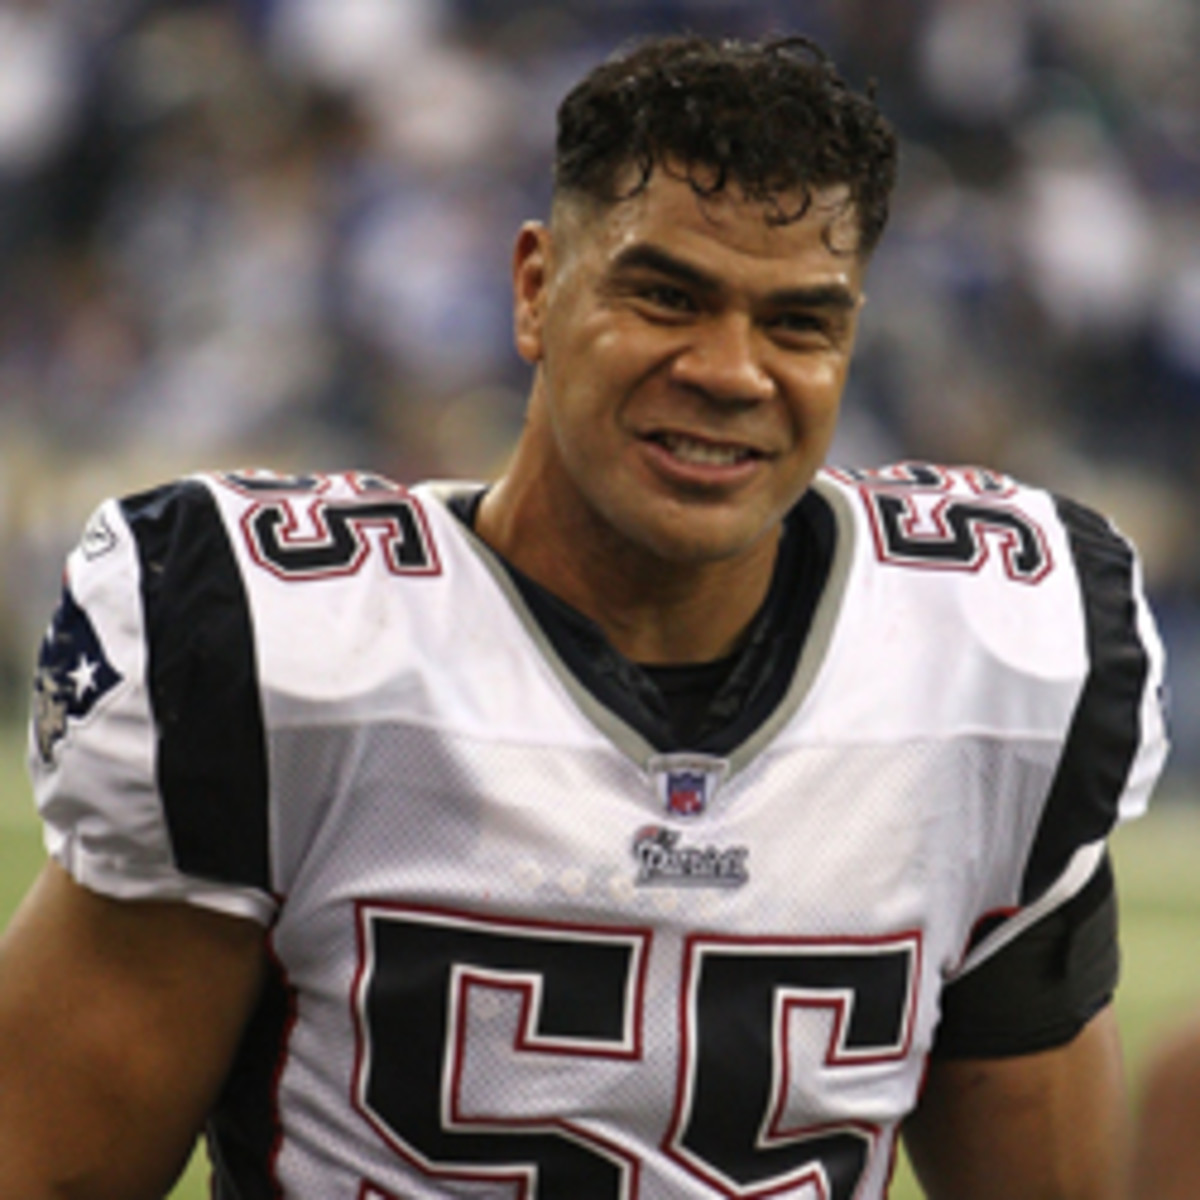 Junior Seau toxicology shows traces of sleep aid - Sports Illustrated